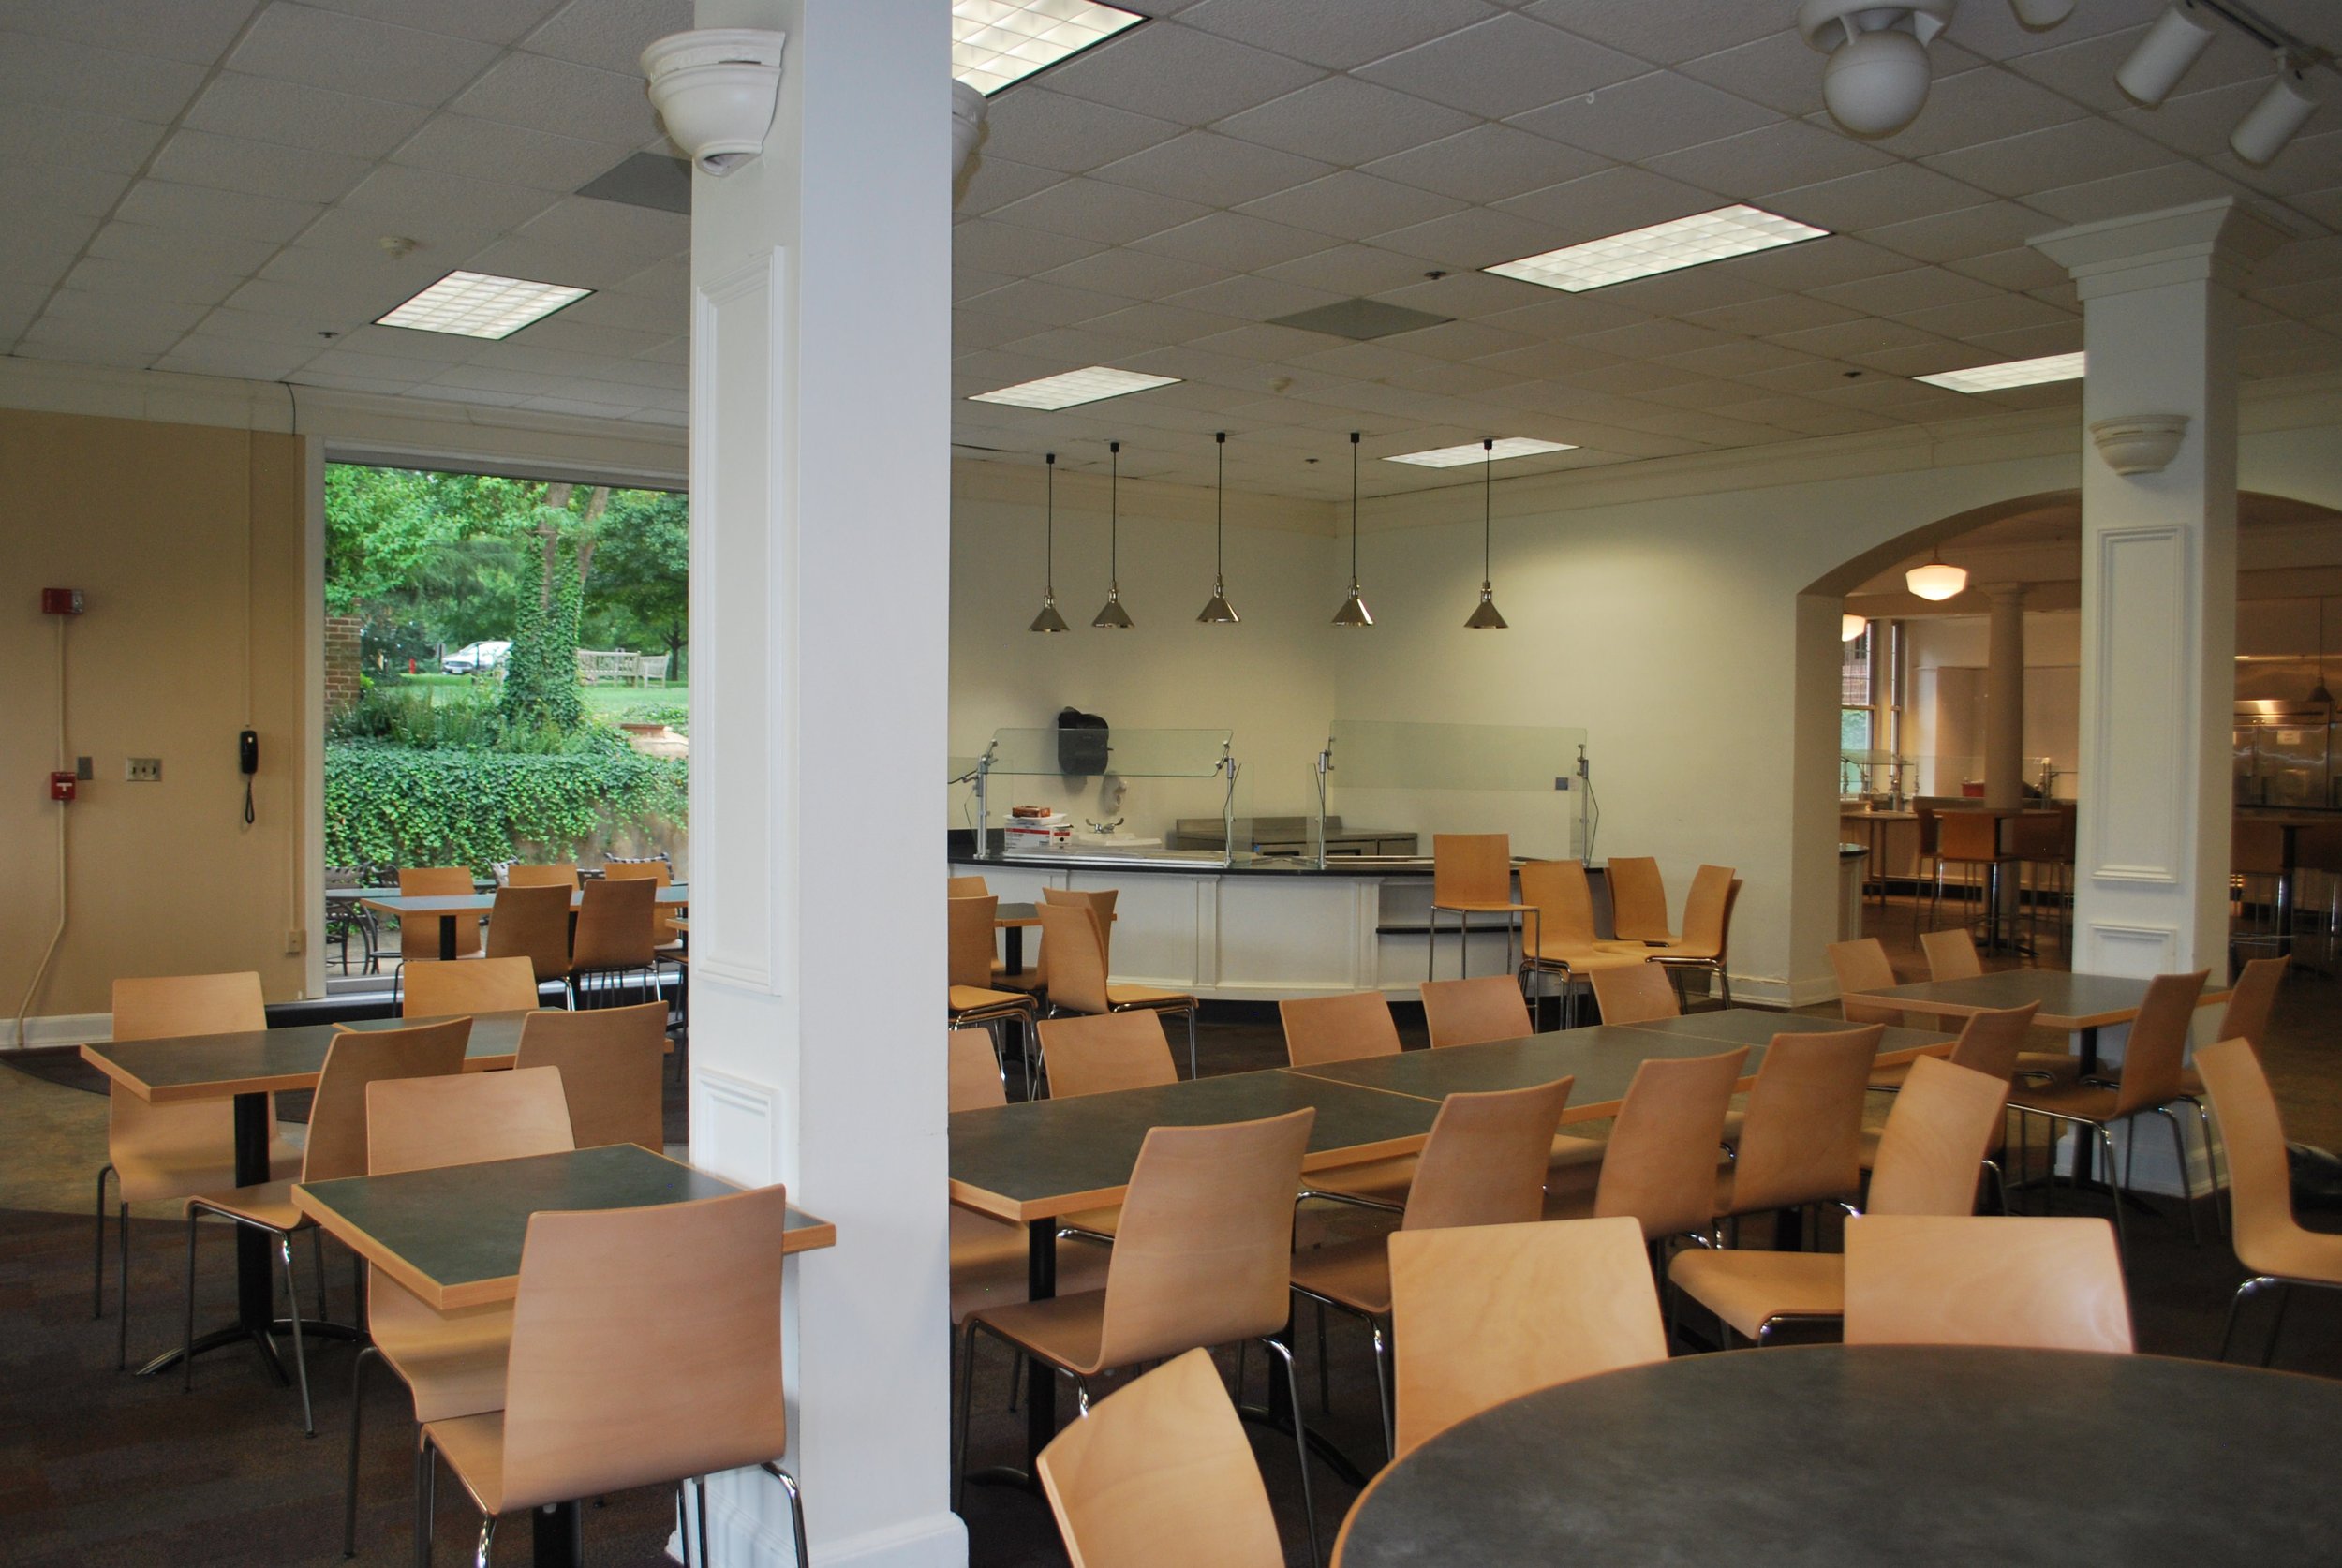 new servery tables and chairs.JPG